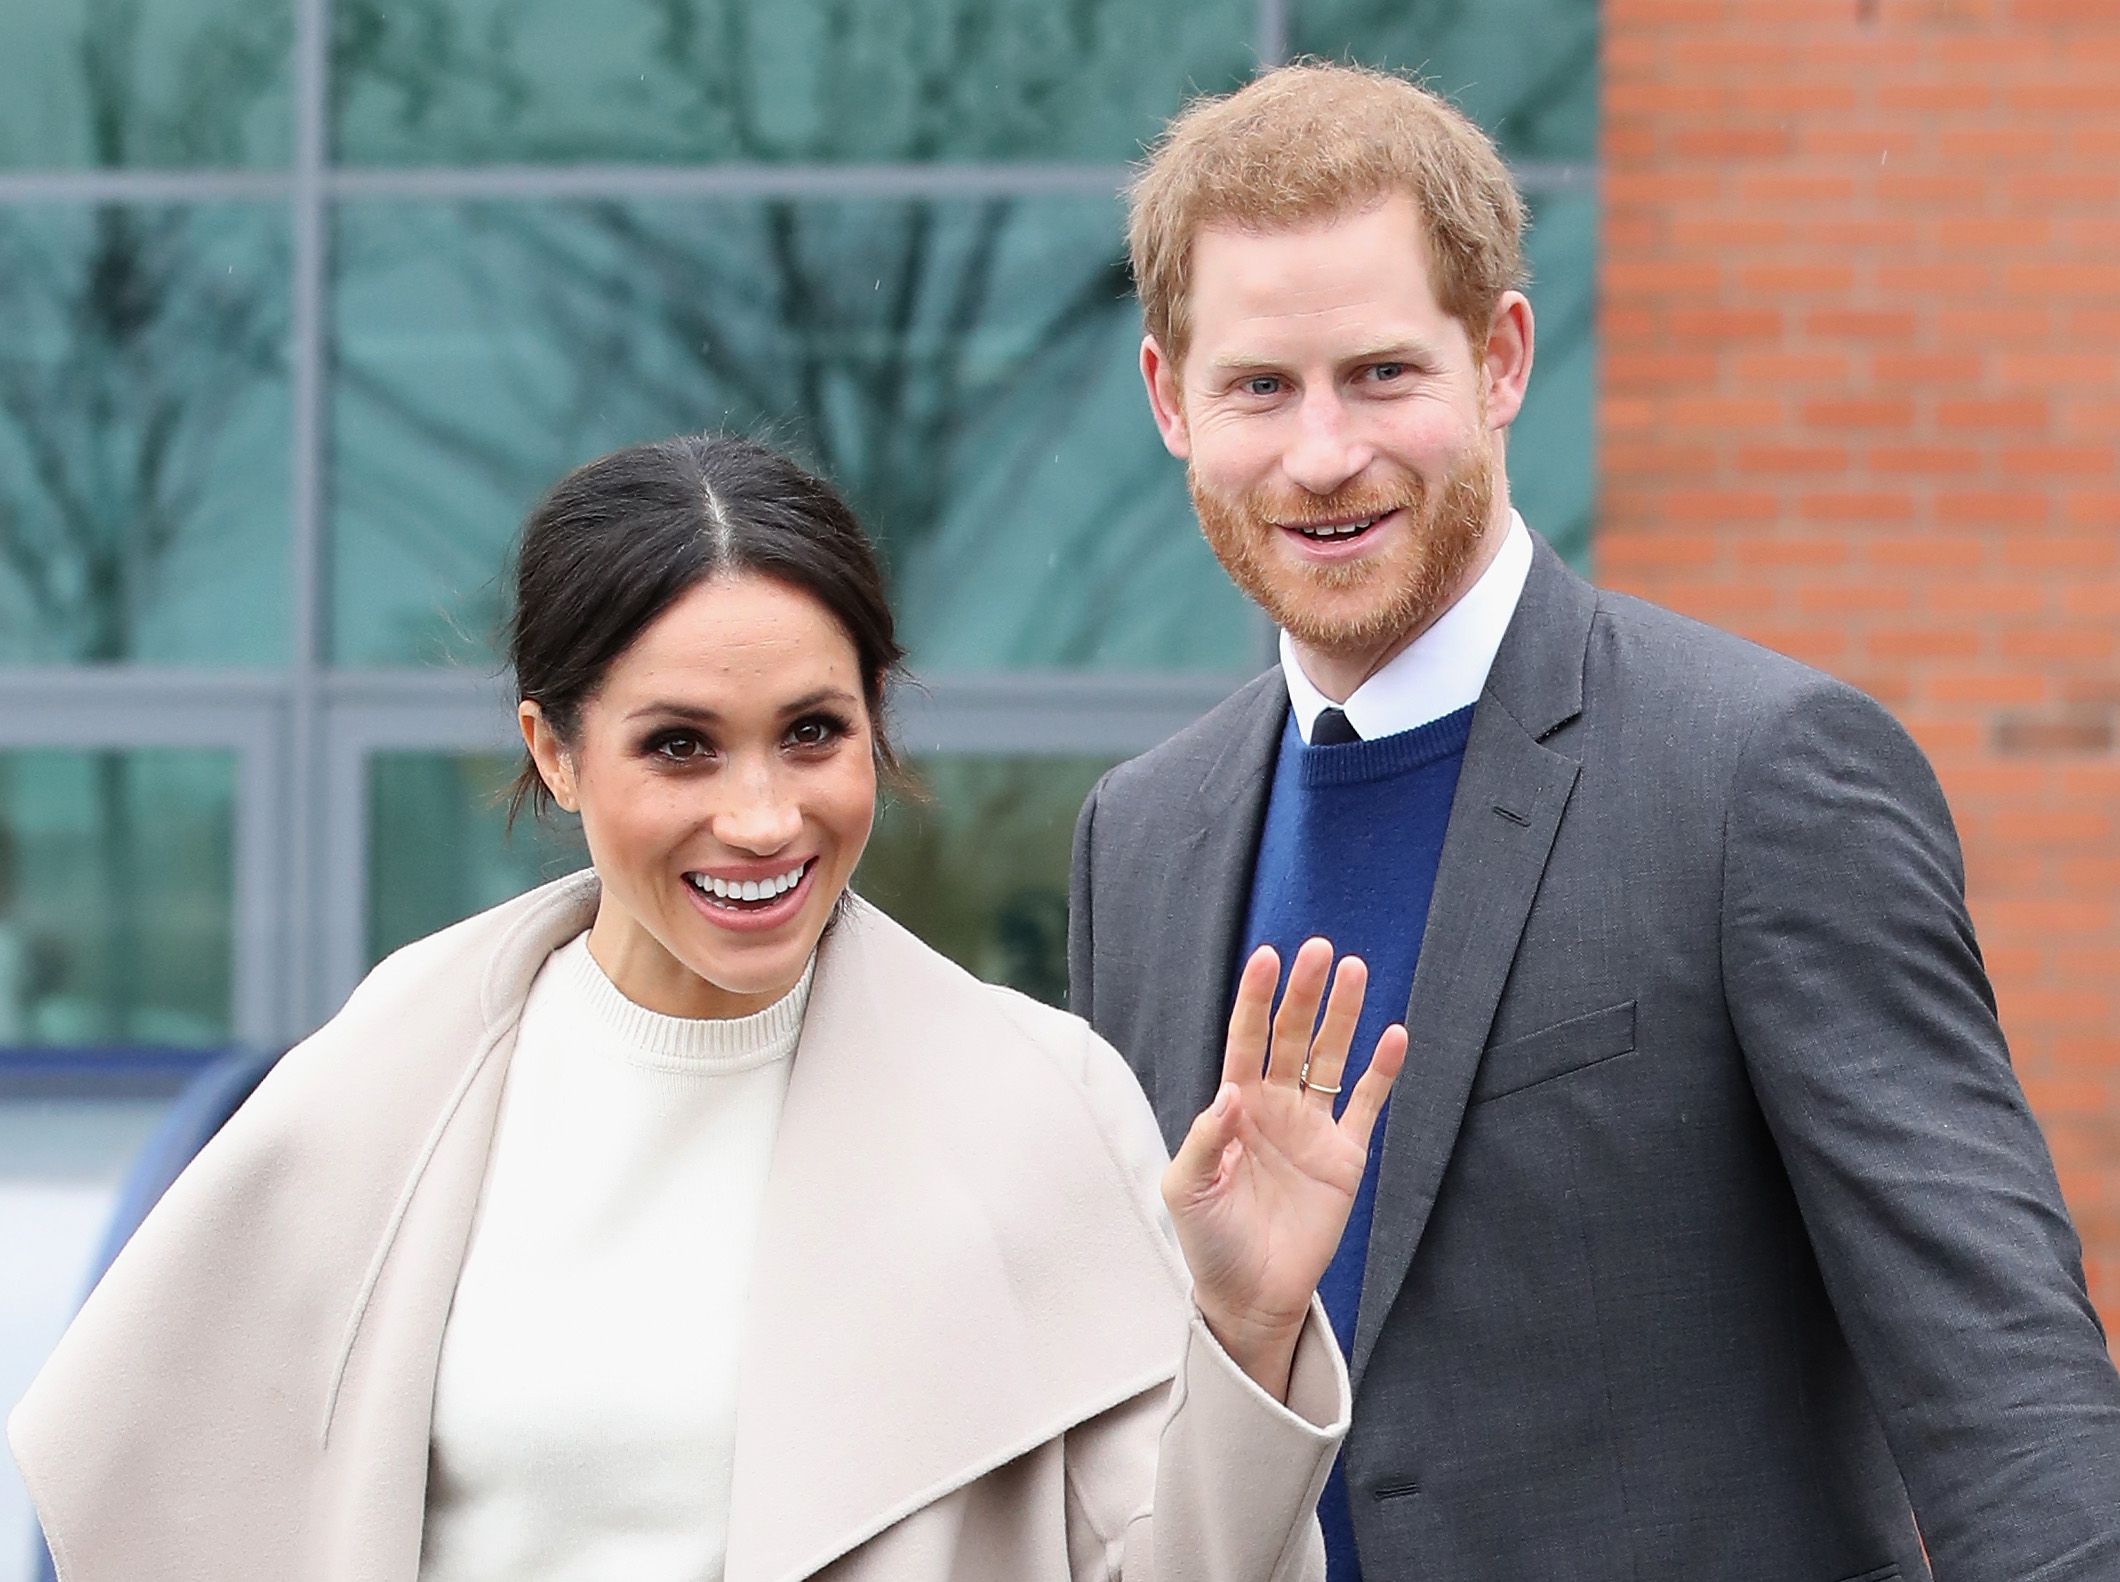 Prince Harry and Meghan Markle leave Catalyst Inc, Northern Ireland on March 23, 2018 | Photo: Getty Images